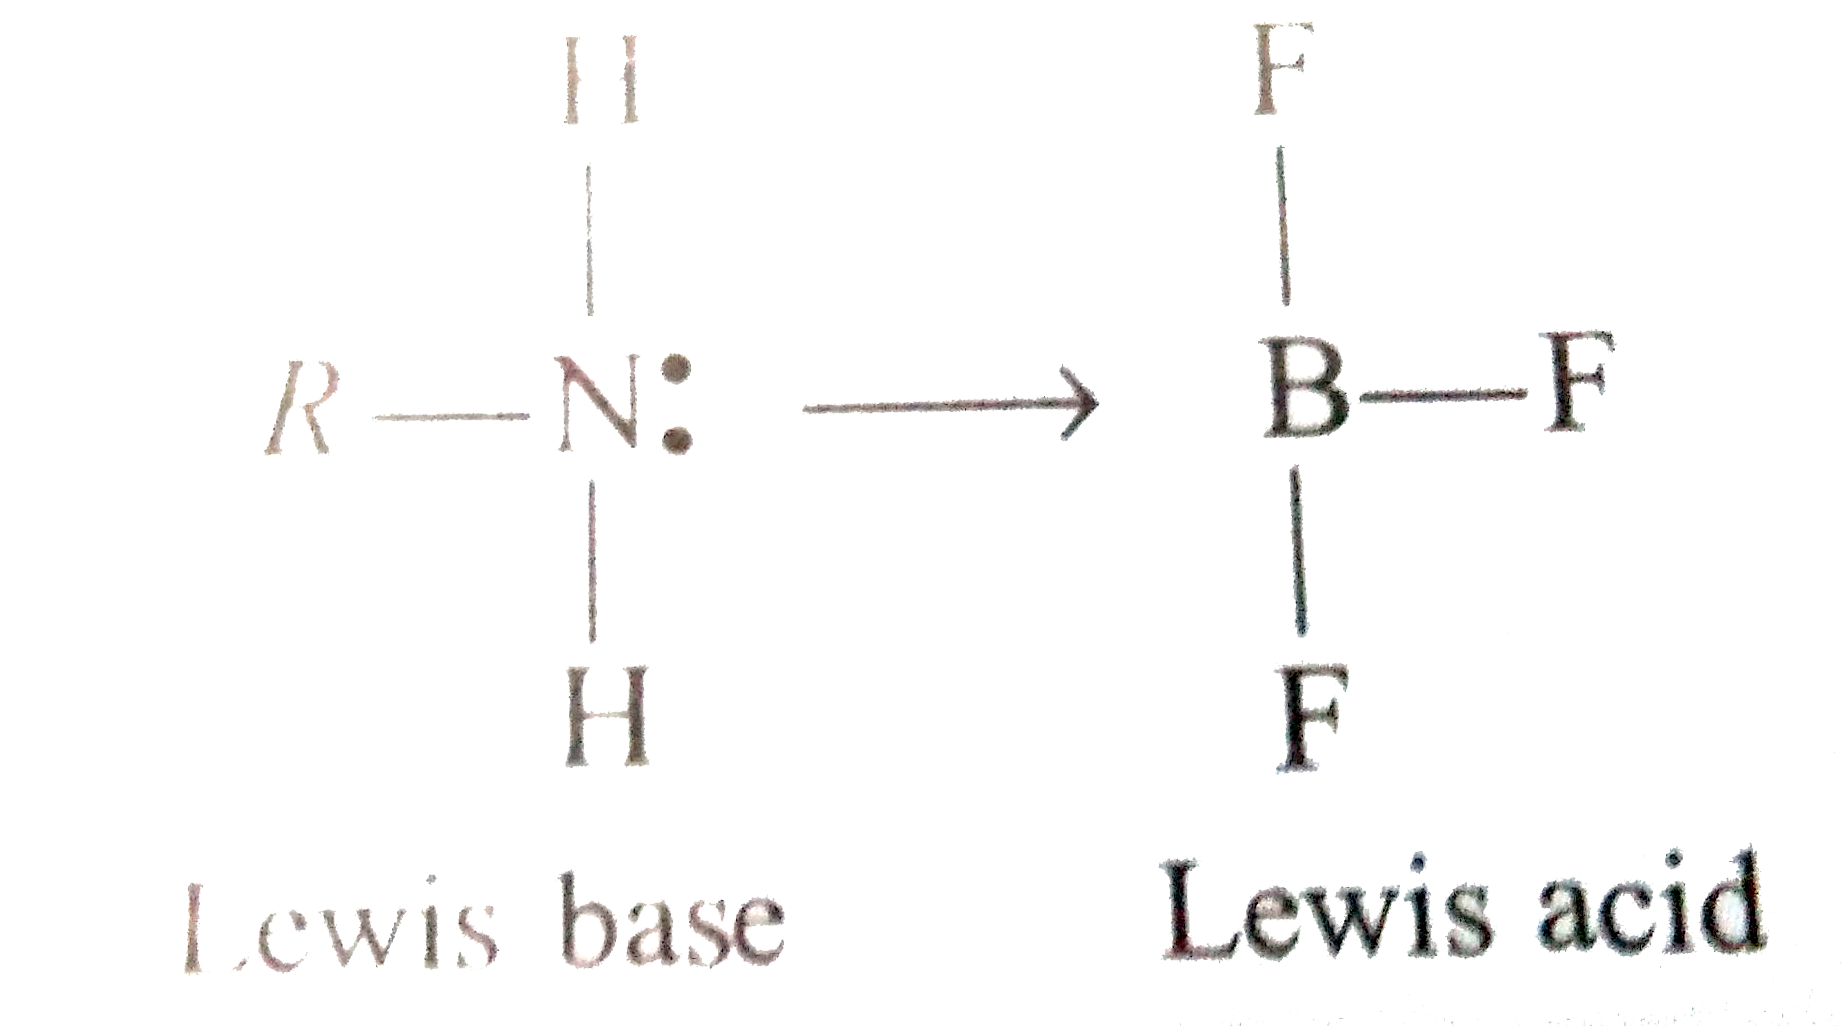 Amines are basic compounds They act as Lewis base due to the presence of lone pair electrons at nitrogen      Amines also behave as base as well as Bronsted inductive effect, steric hindrance and resosnance.   CH(3)-NH(2)+HOH hArr CH(3)-NH(3)^(+)+OH^(-)   CH(3)-NH(2)+H^(+)Cl^(-)hArr CH(3)-NH(3)^(+)+Cl^(-)   Alkyl groups and electron groups hence these groups  increases the electron density at nitrogen as well as the basic amines character of amines. Basic character of teritary amines is reduced due to the steric hindrance of three alkyl groups. Experimentally it is observed that stronger bases have smaller values of pK(b) greater value of K(b).   Which among the following is the most basic in aqueous medium?